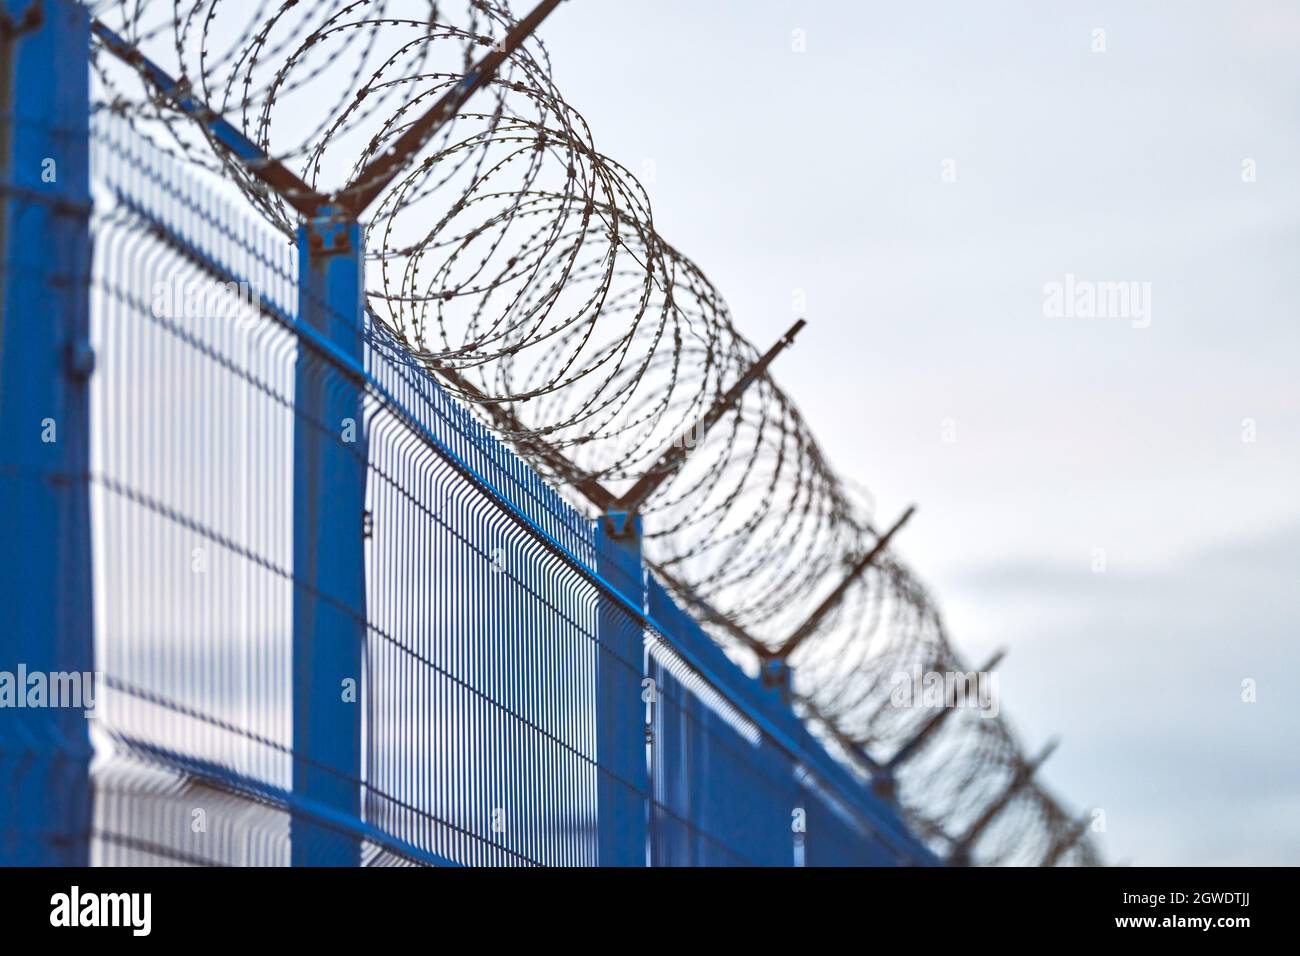 Low Angle View Of Barbed Wire On Fence Against Sky Stock Photo